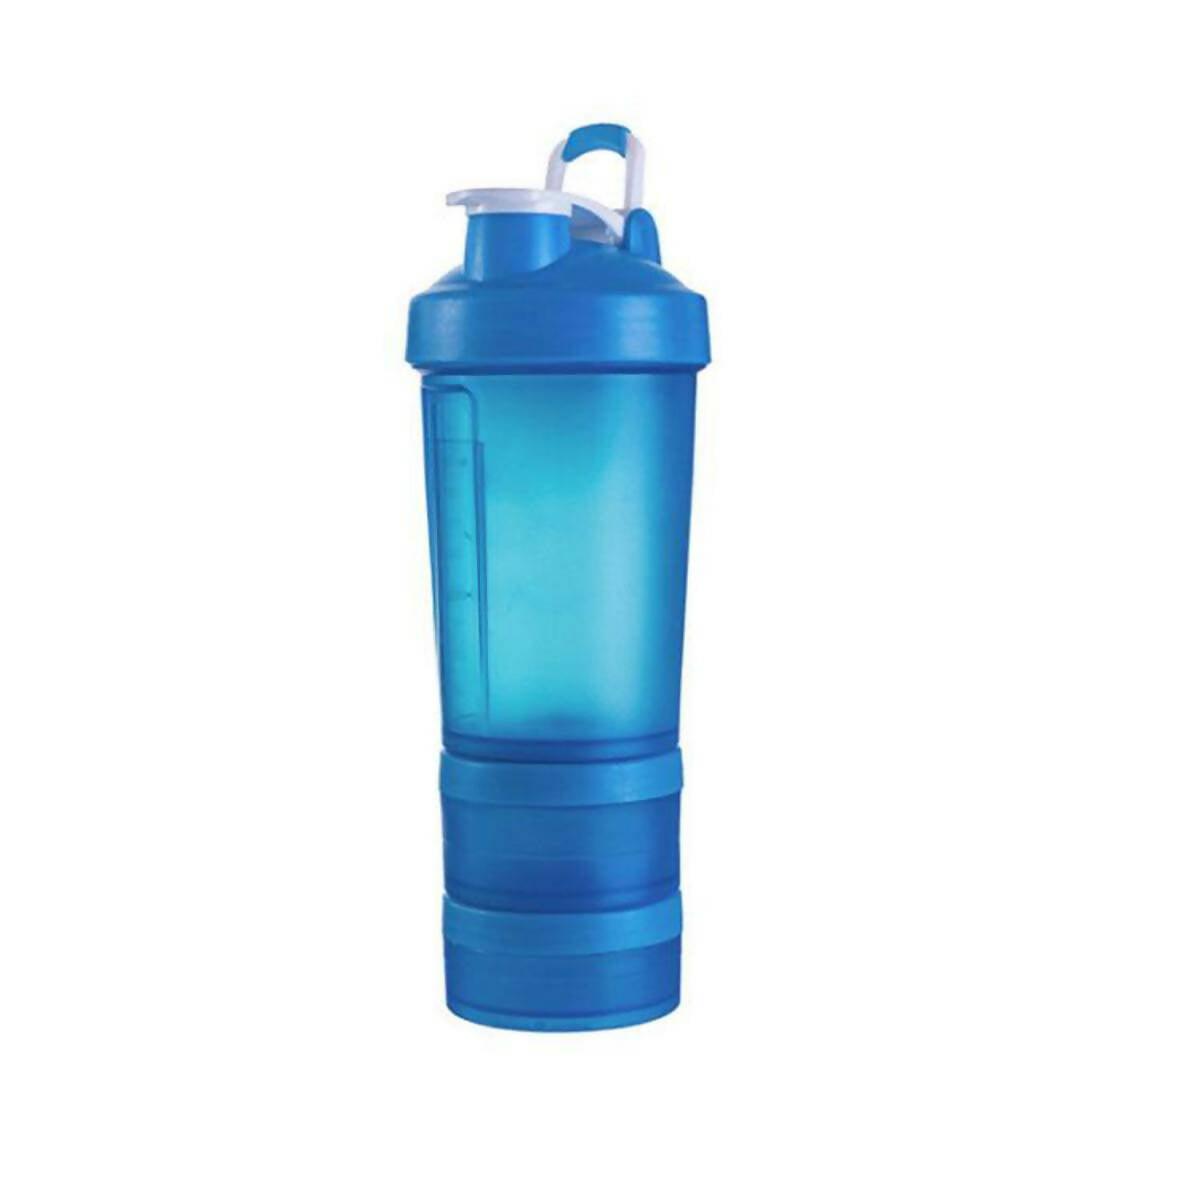 3 in 1 Sports Shaker Bottle For Gym - Storage & Pill Compartments - 450ml - Light Blue - ValueBox